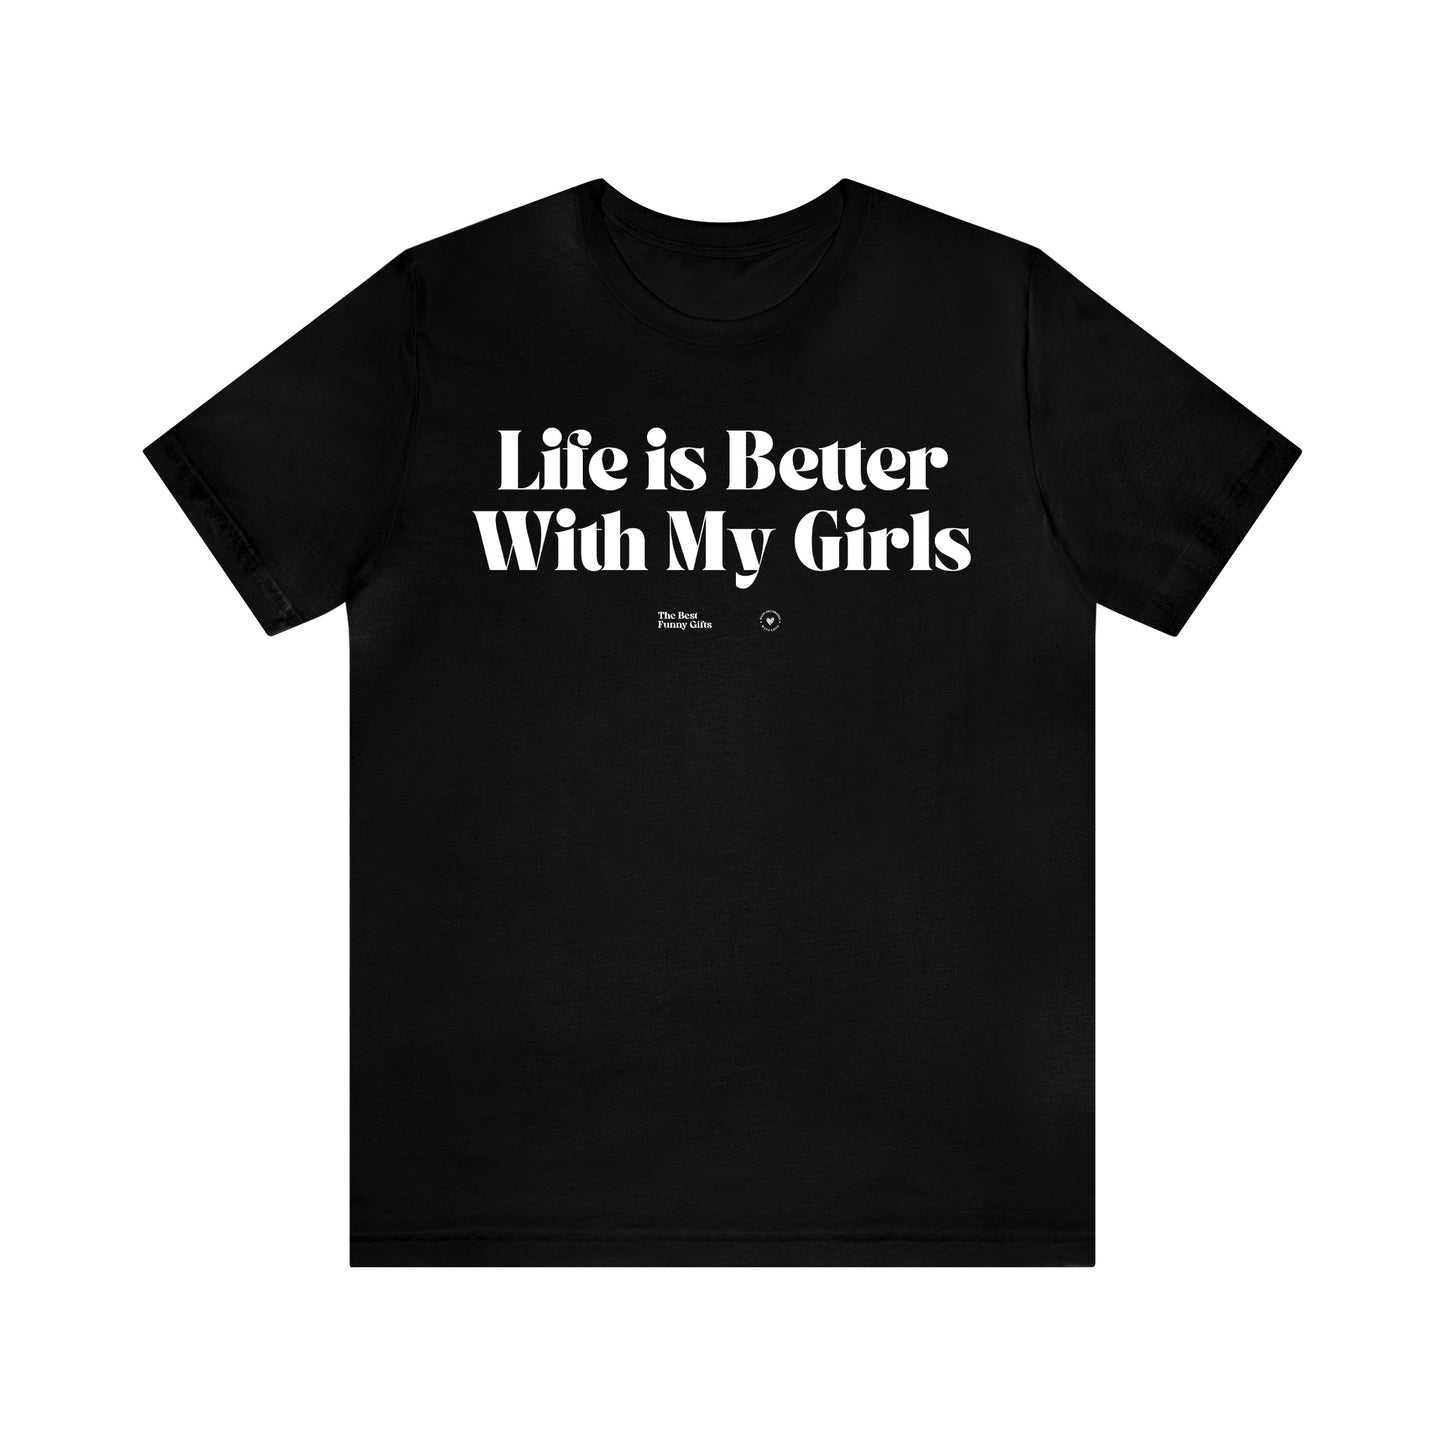 Funny Shirts for Women - Life is Better With My Girls - Women’s T Shirts